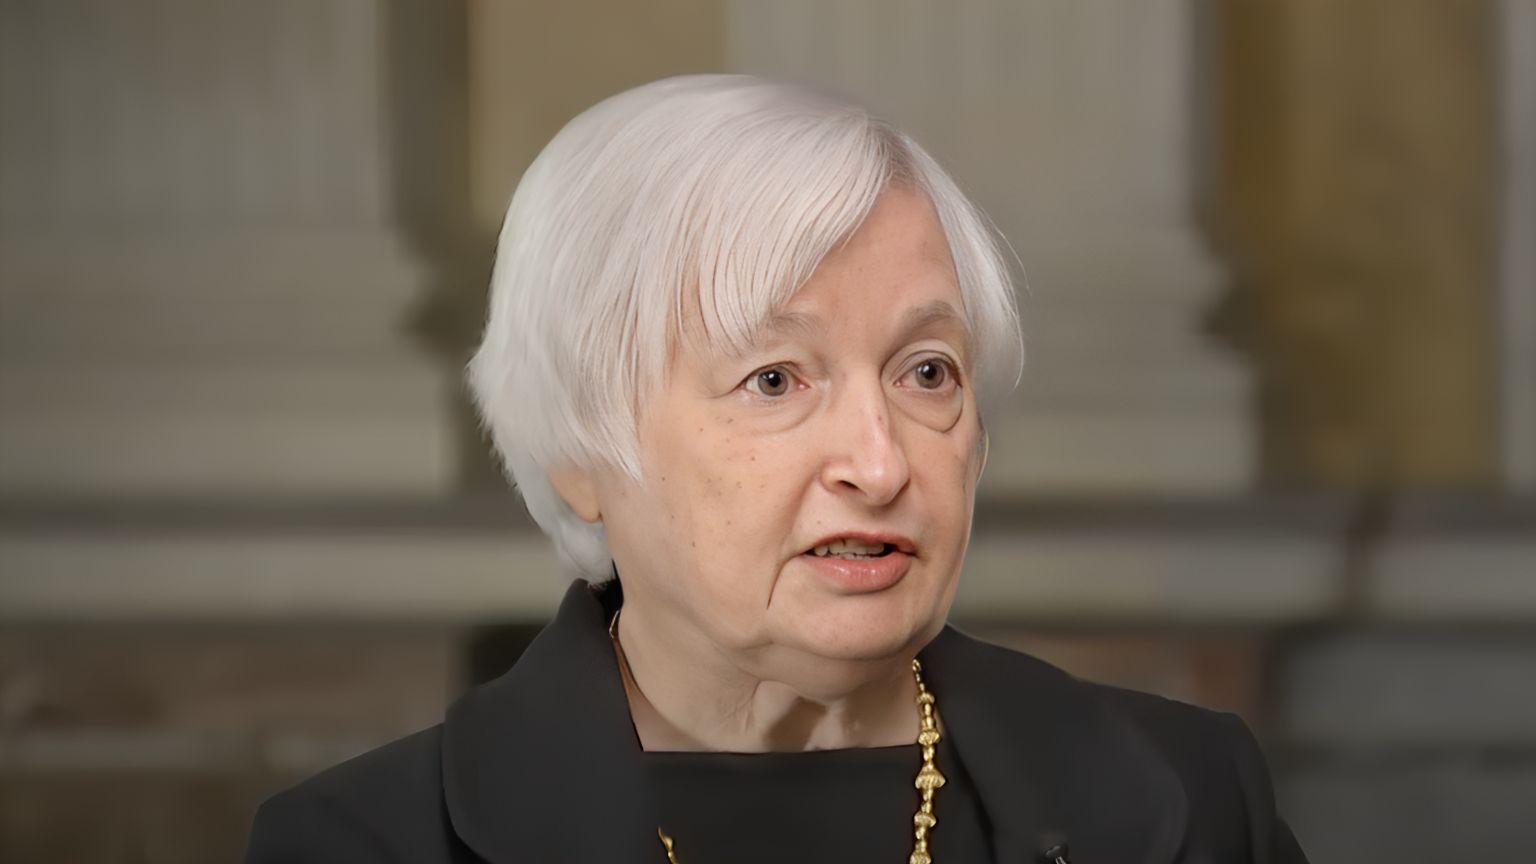 Janet Yellen says CBDCs are “certainly worth getting involved in developing”